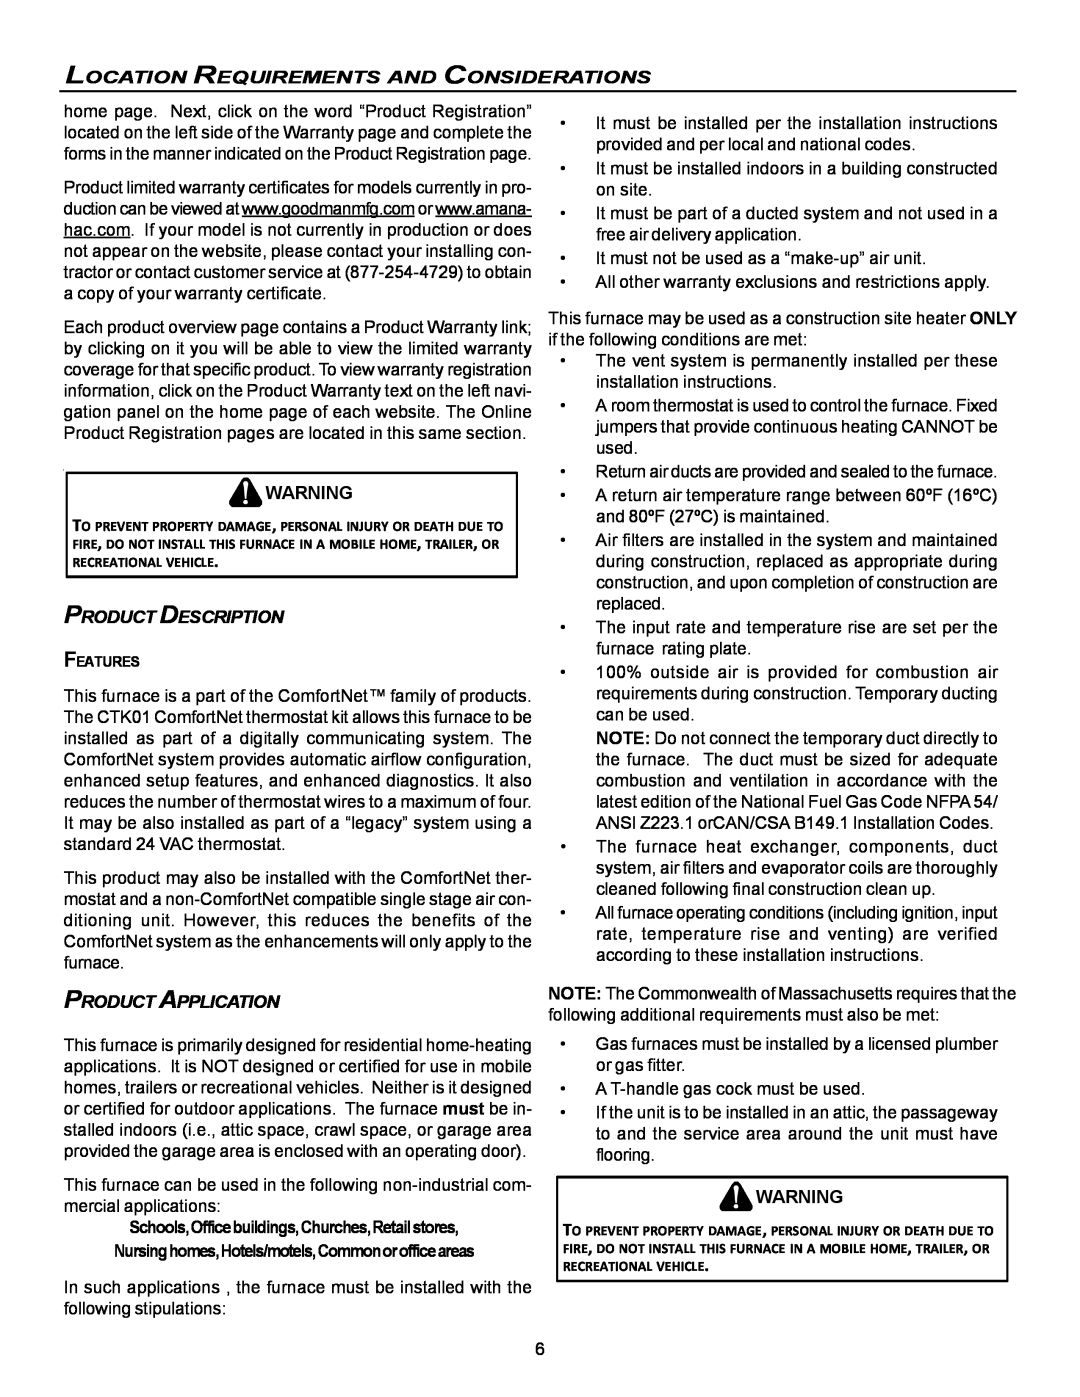 Goodman Mfg VC8 instruction manual Location Requirements And Considerations, Product Description, Product Application 